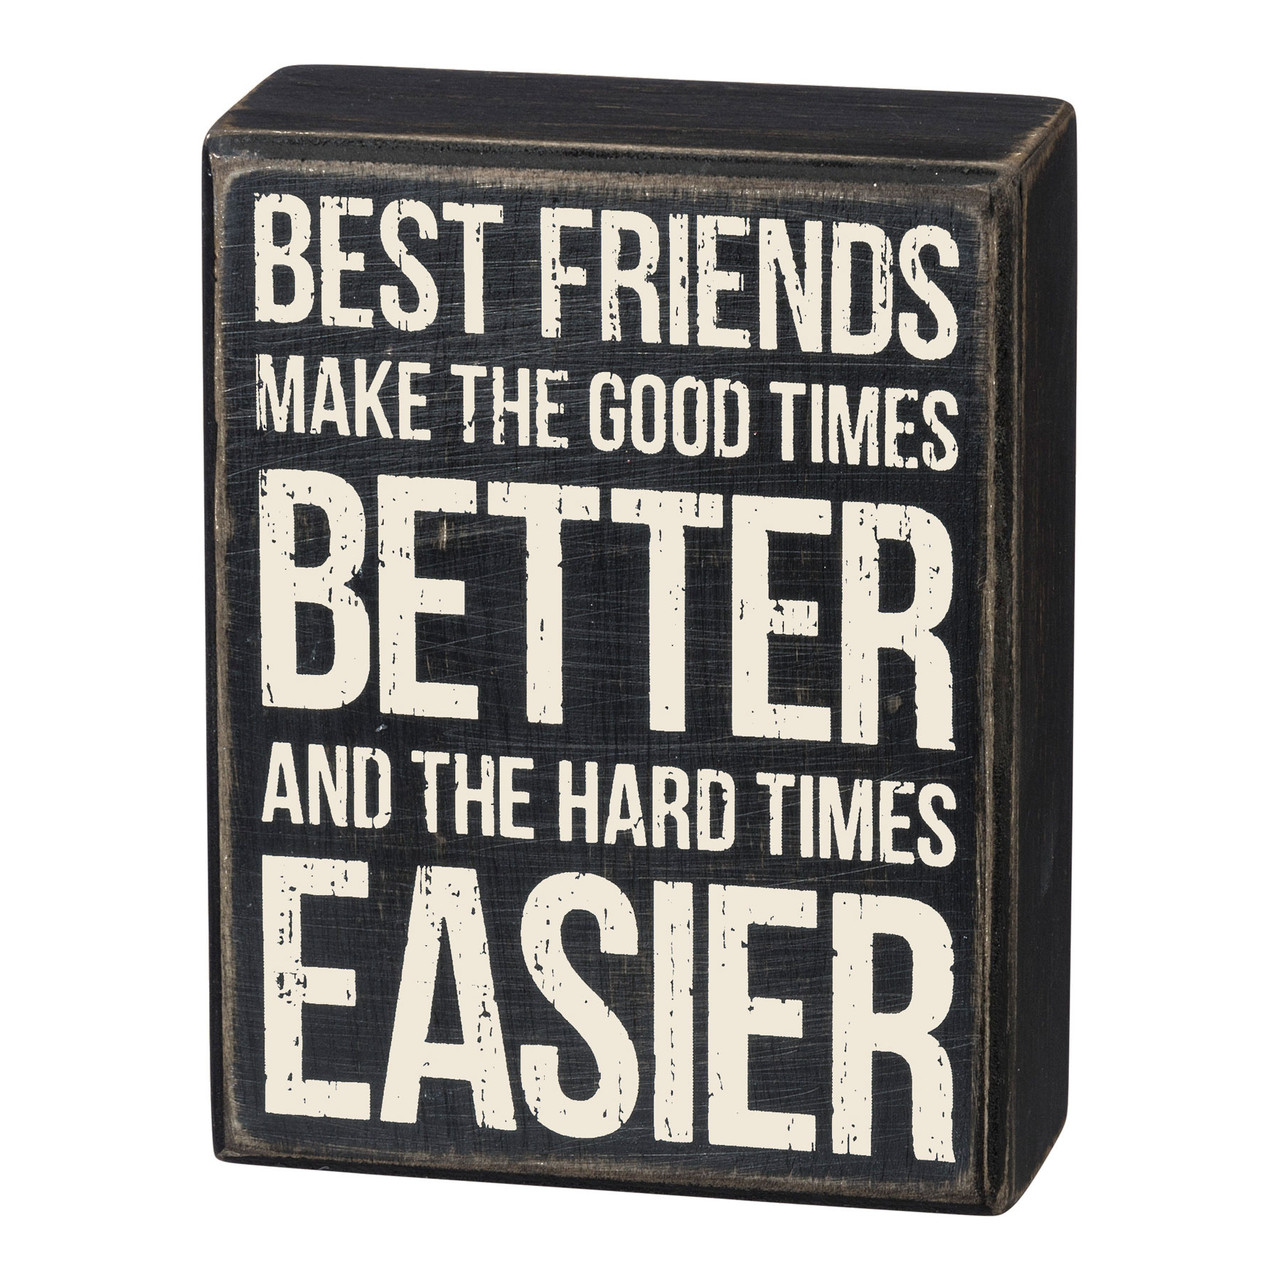 Best-friends-make-good-times-better-and-hard-times-easier